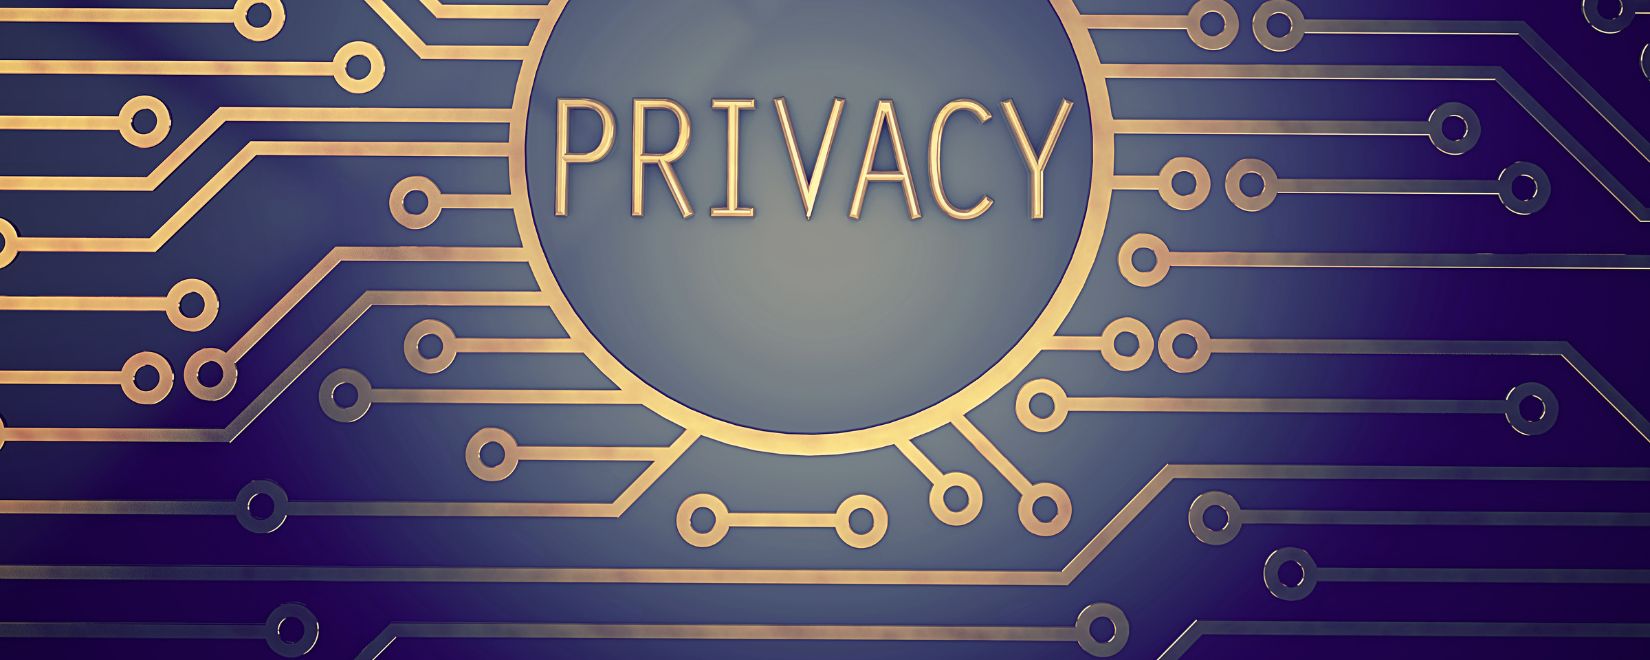 The word PRIVACY in gold letters surrounded by a gold computer network